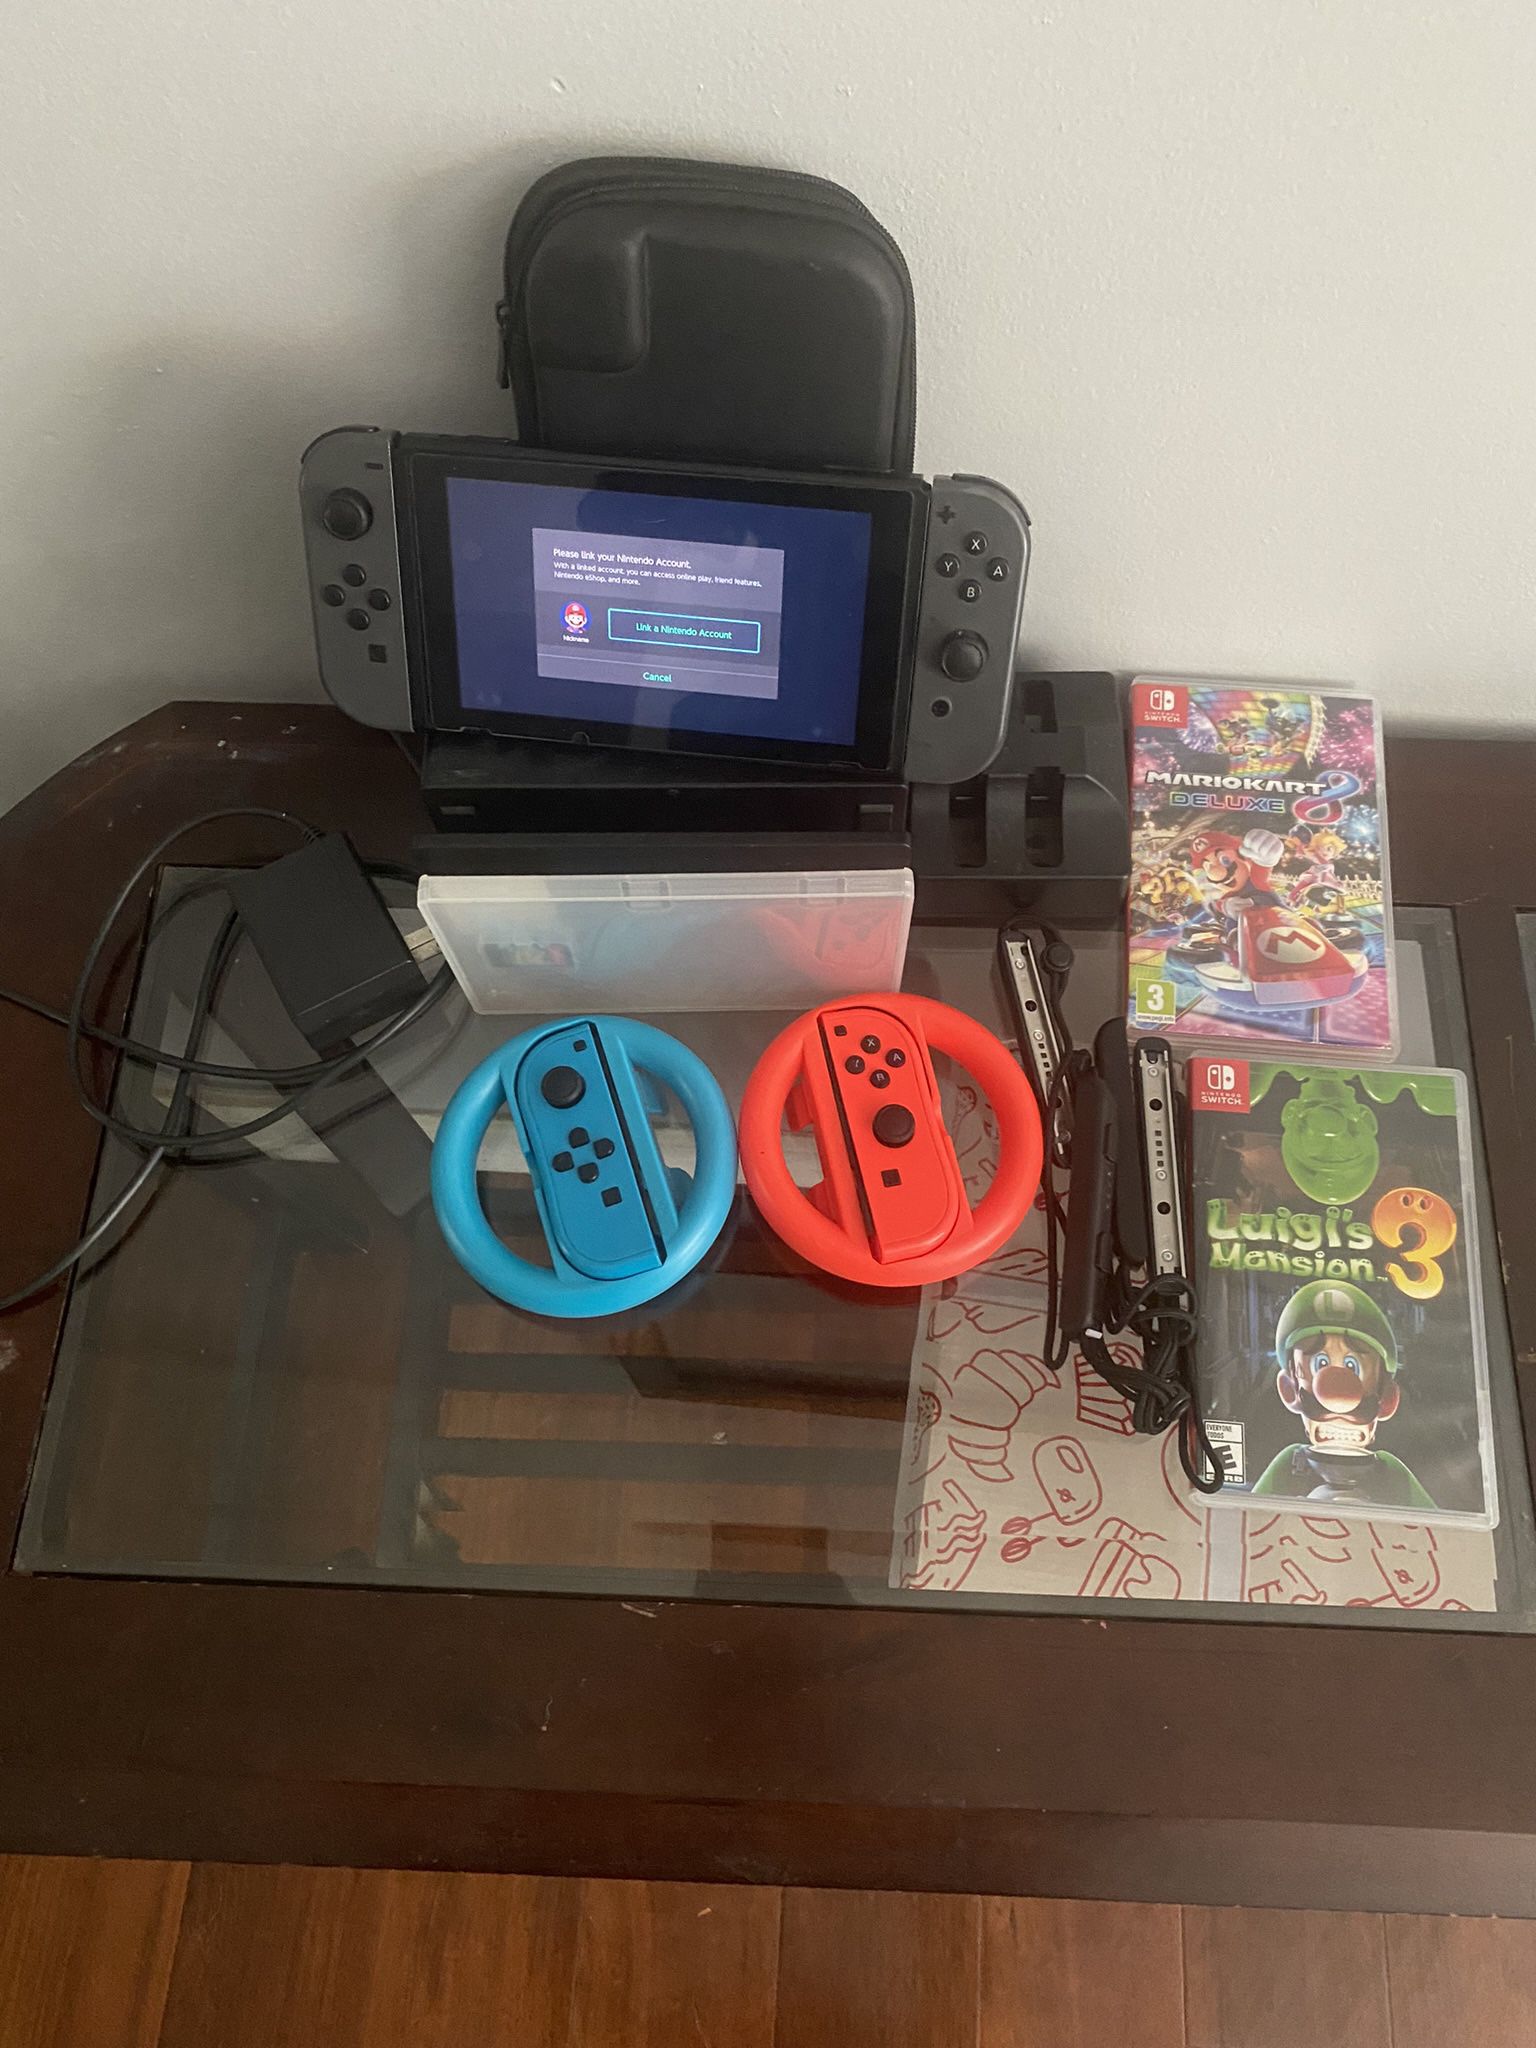 Nintendo Switch And Accessories 